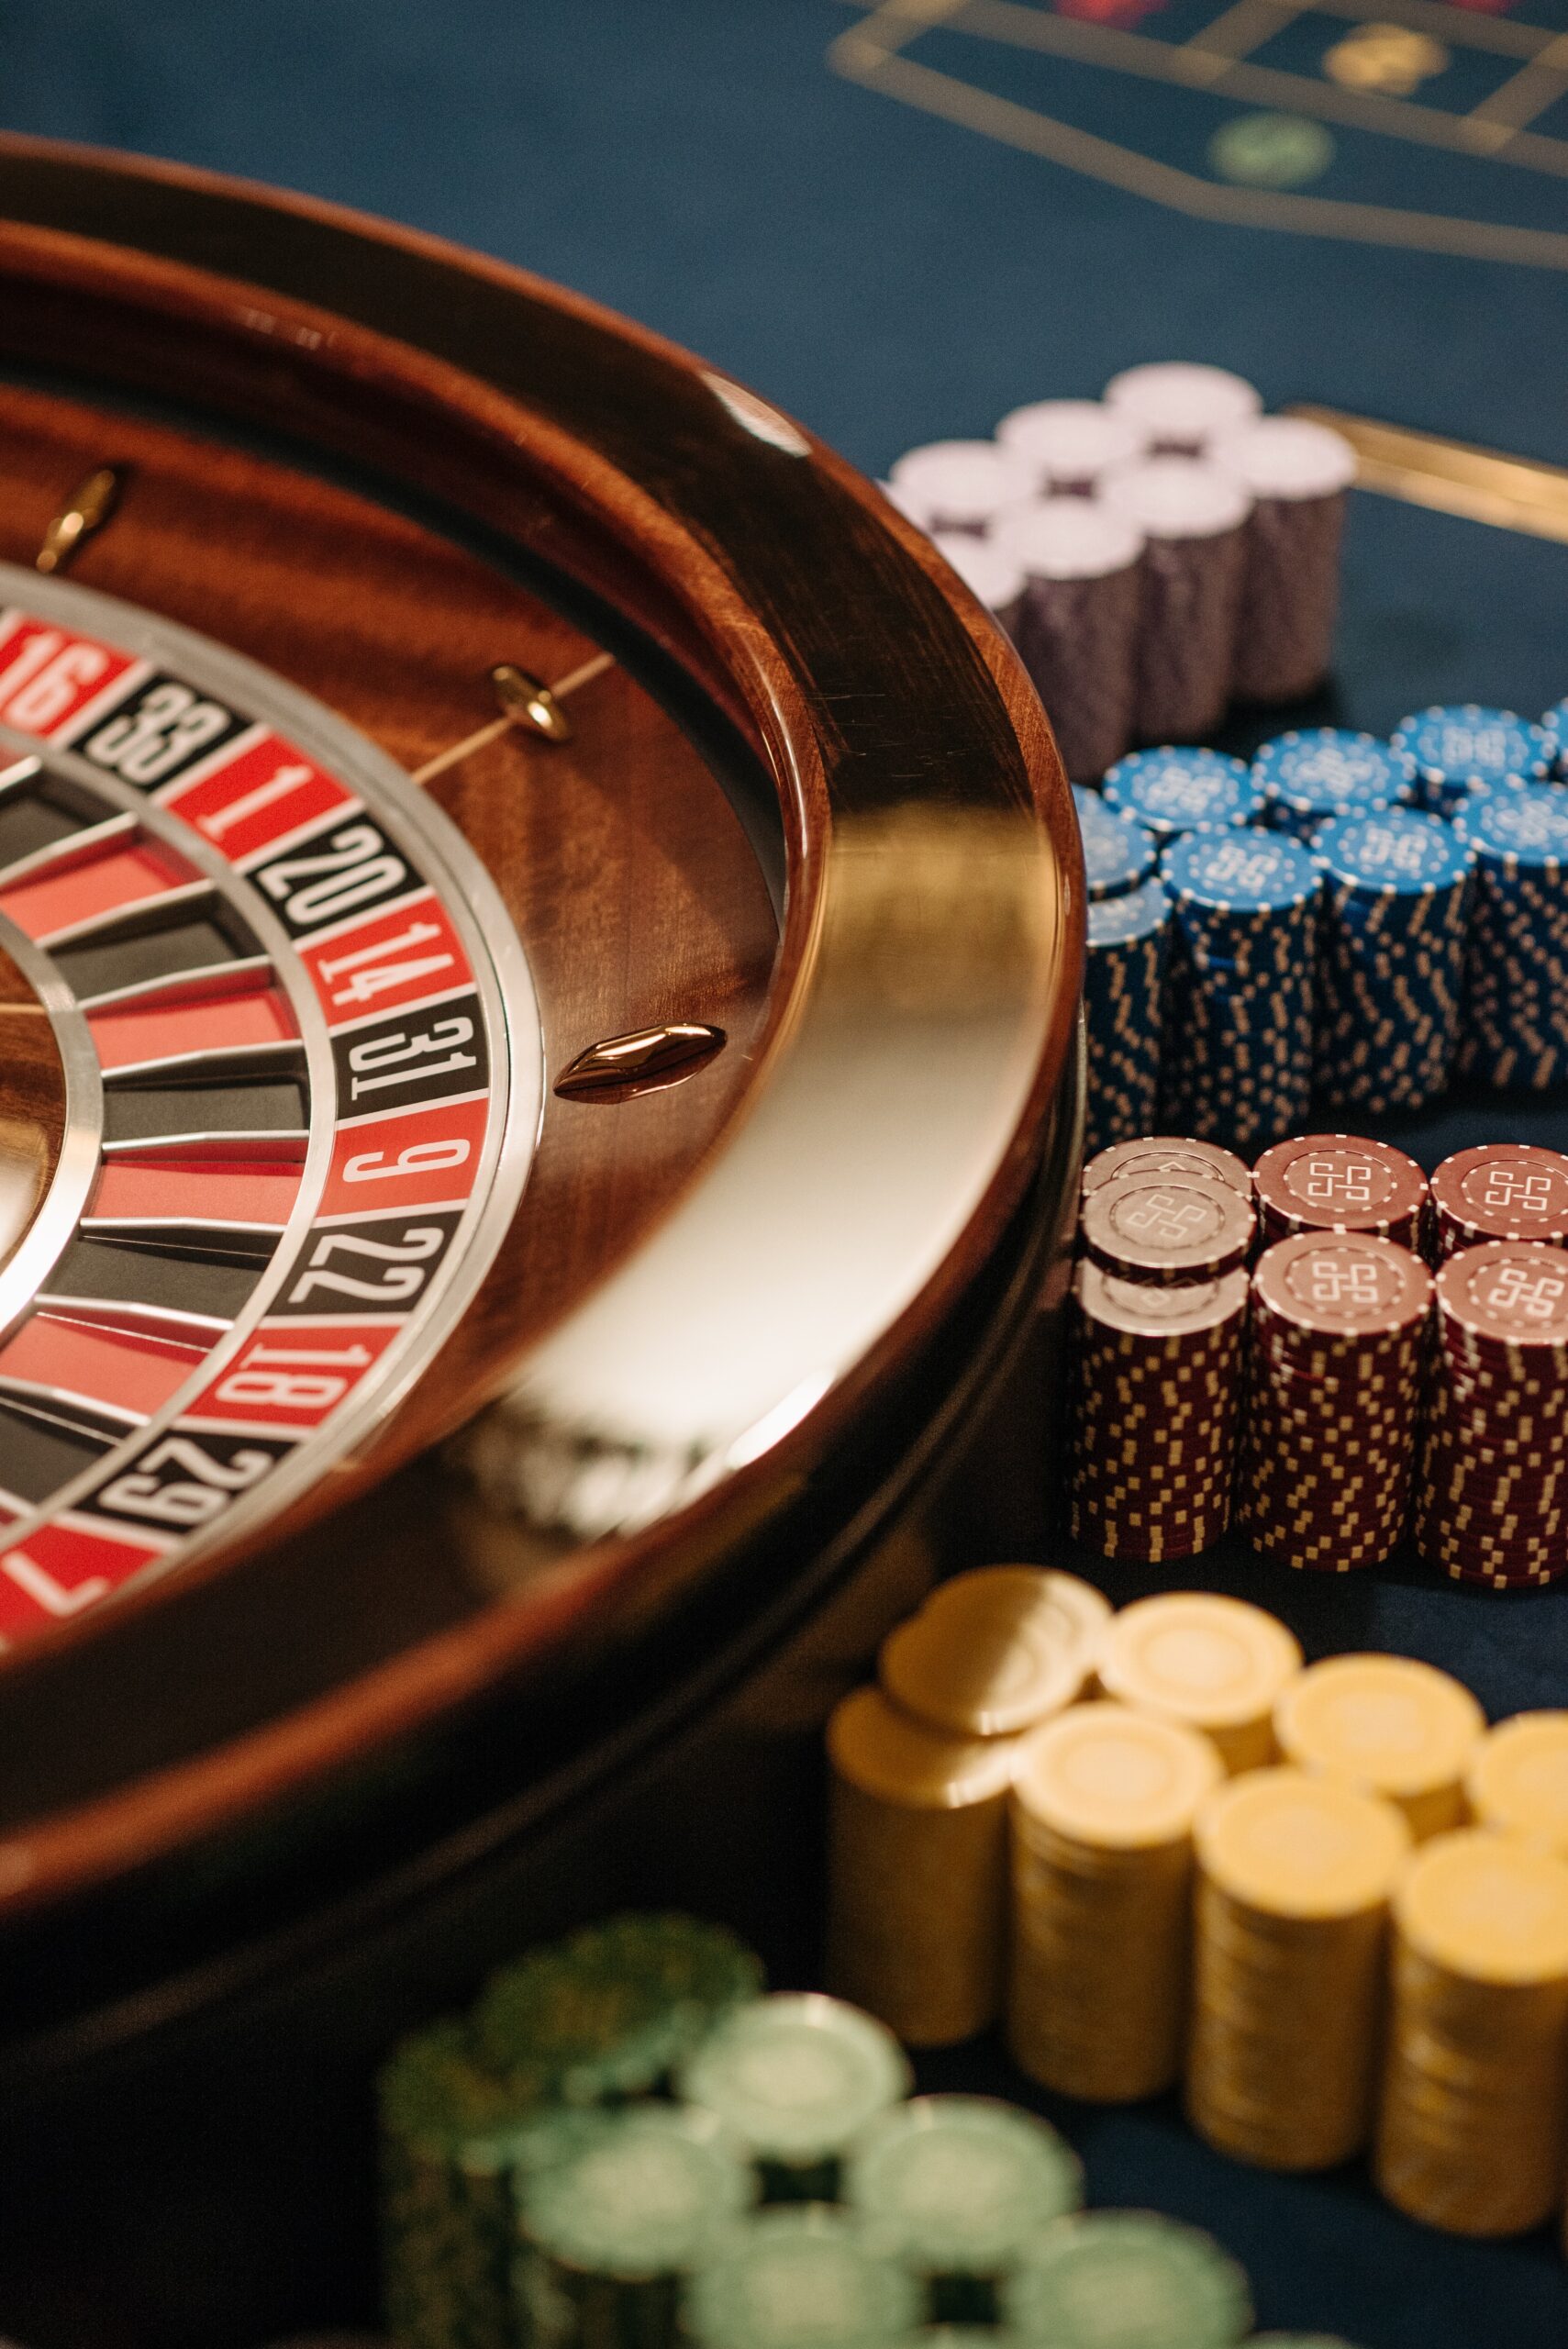 With online casino apps, you can have the ultimate gambling experience icon